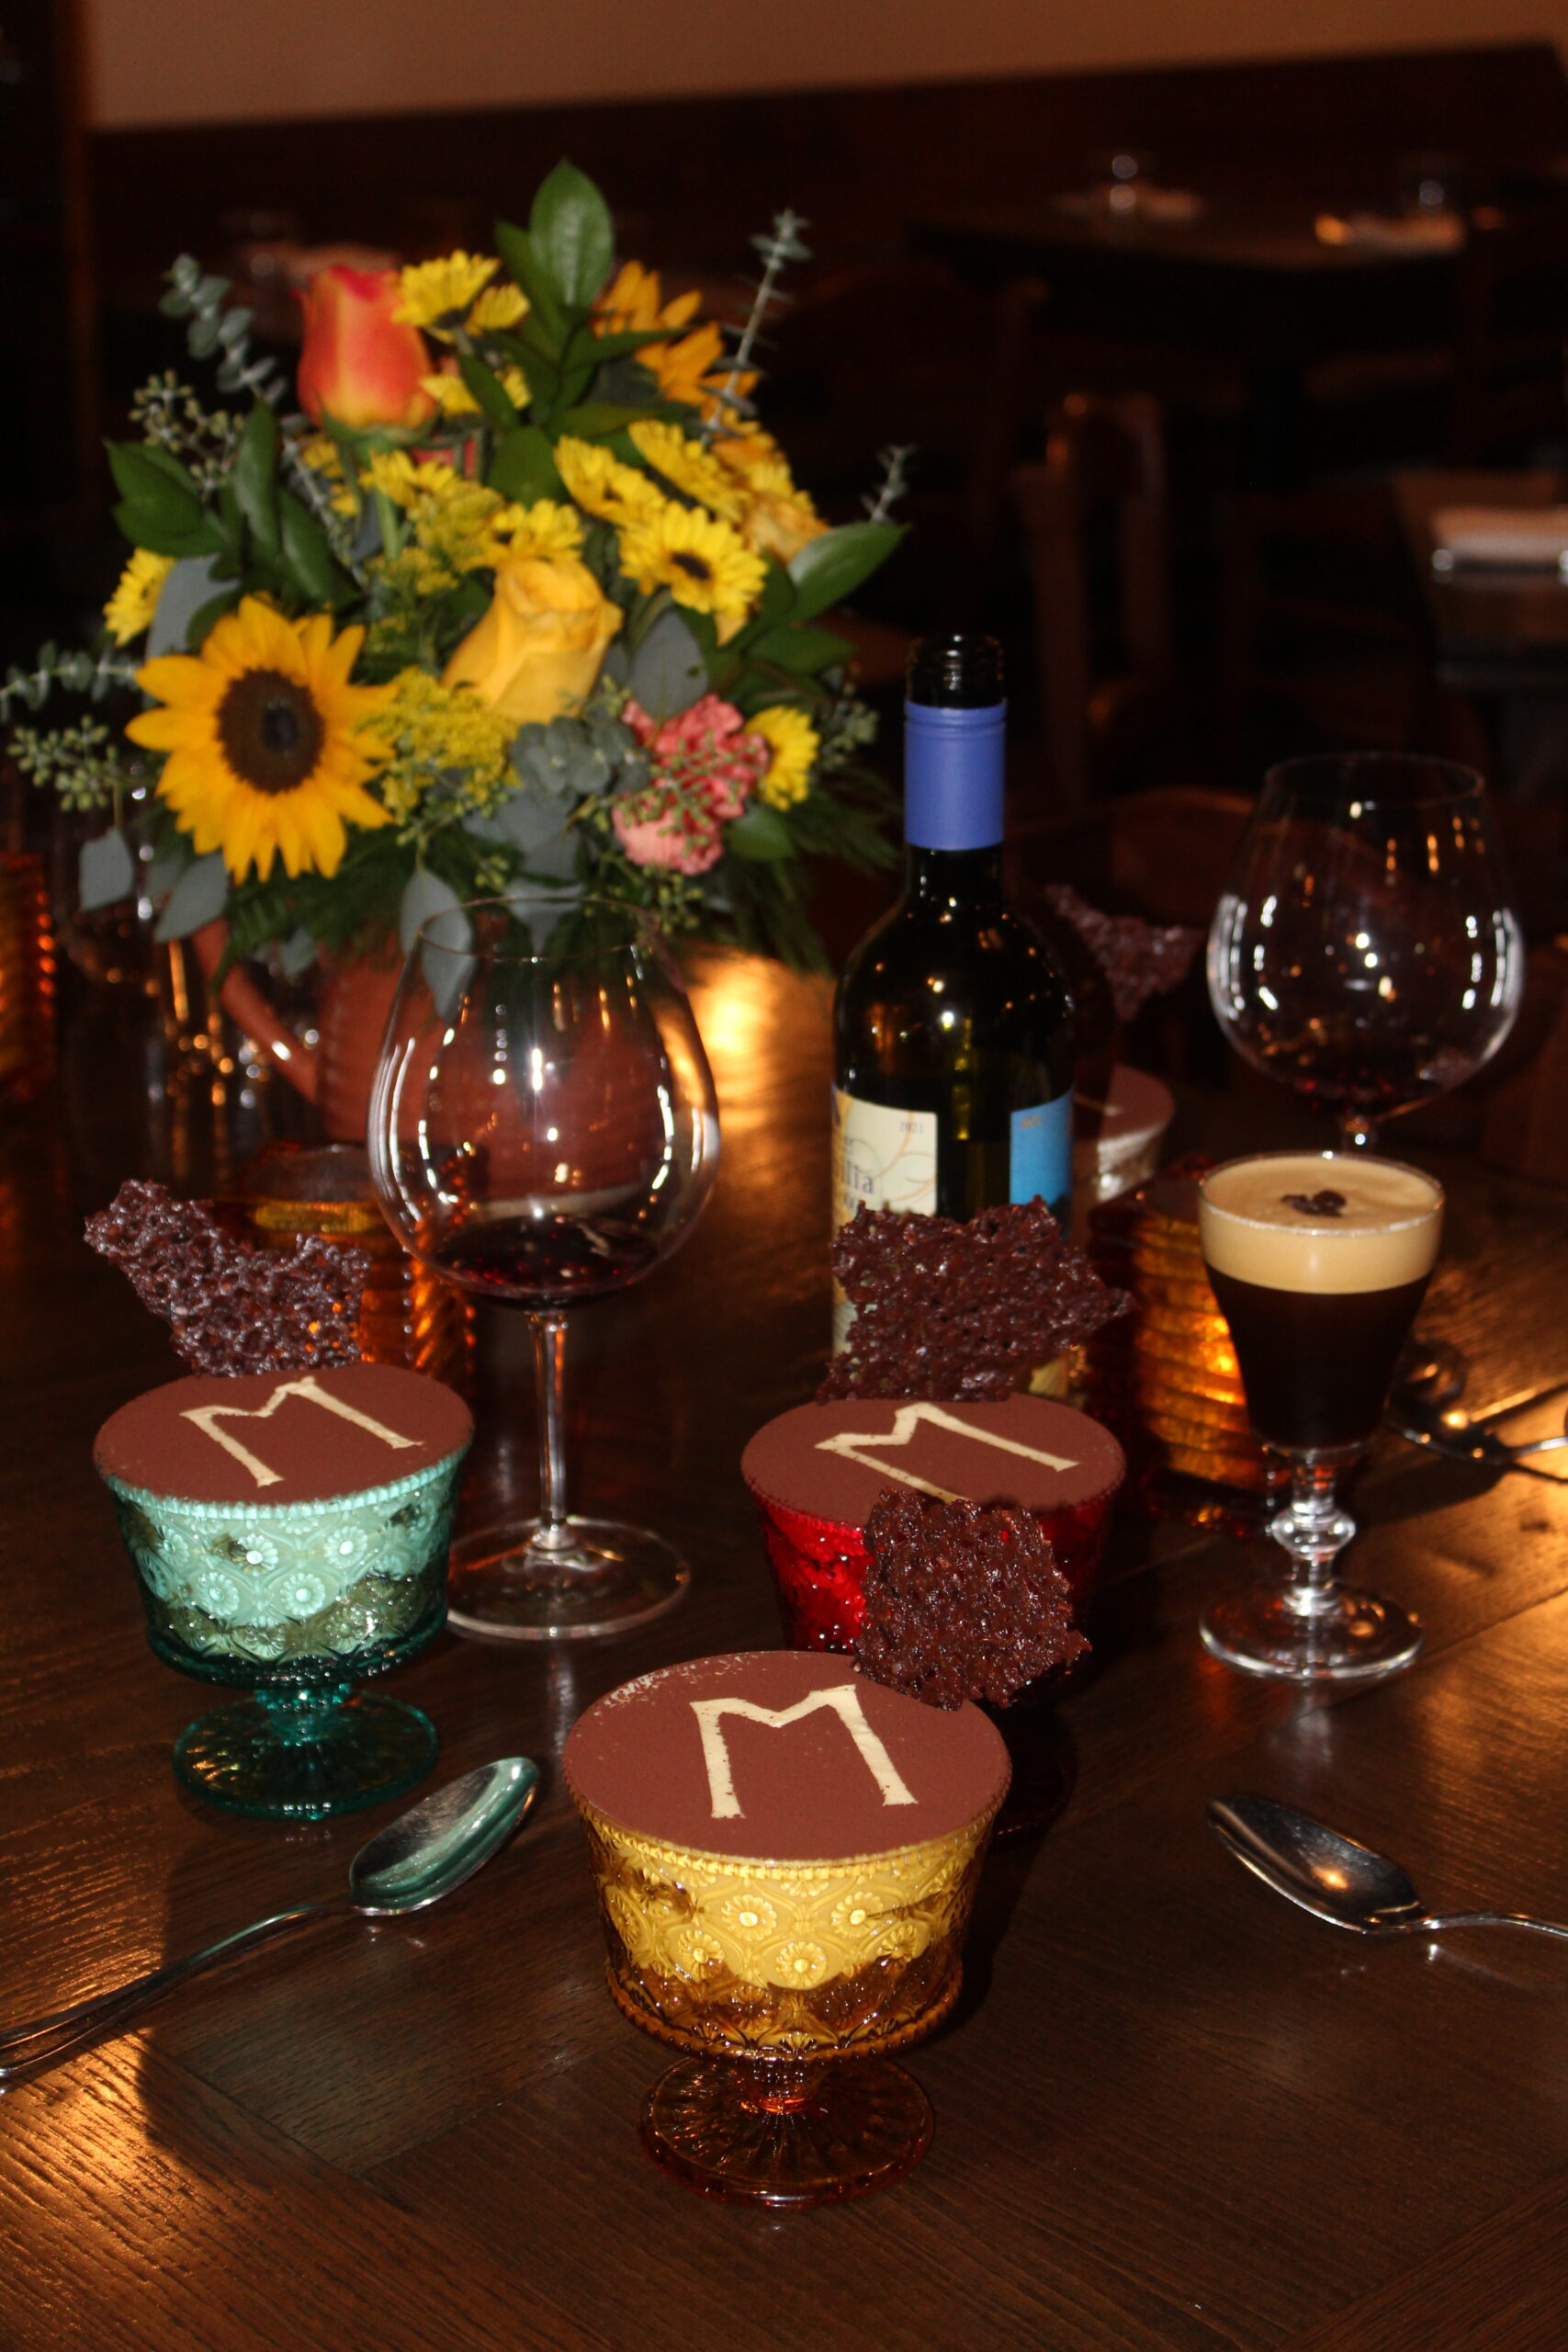 a table with flowers, tiramisus, a bottle of wine, espresso martinis